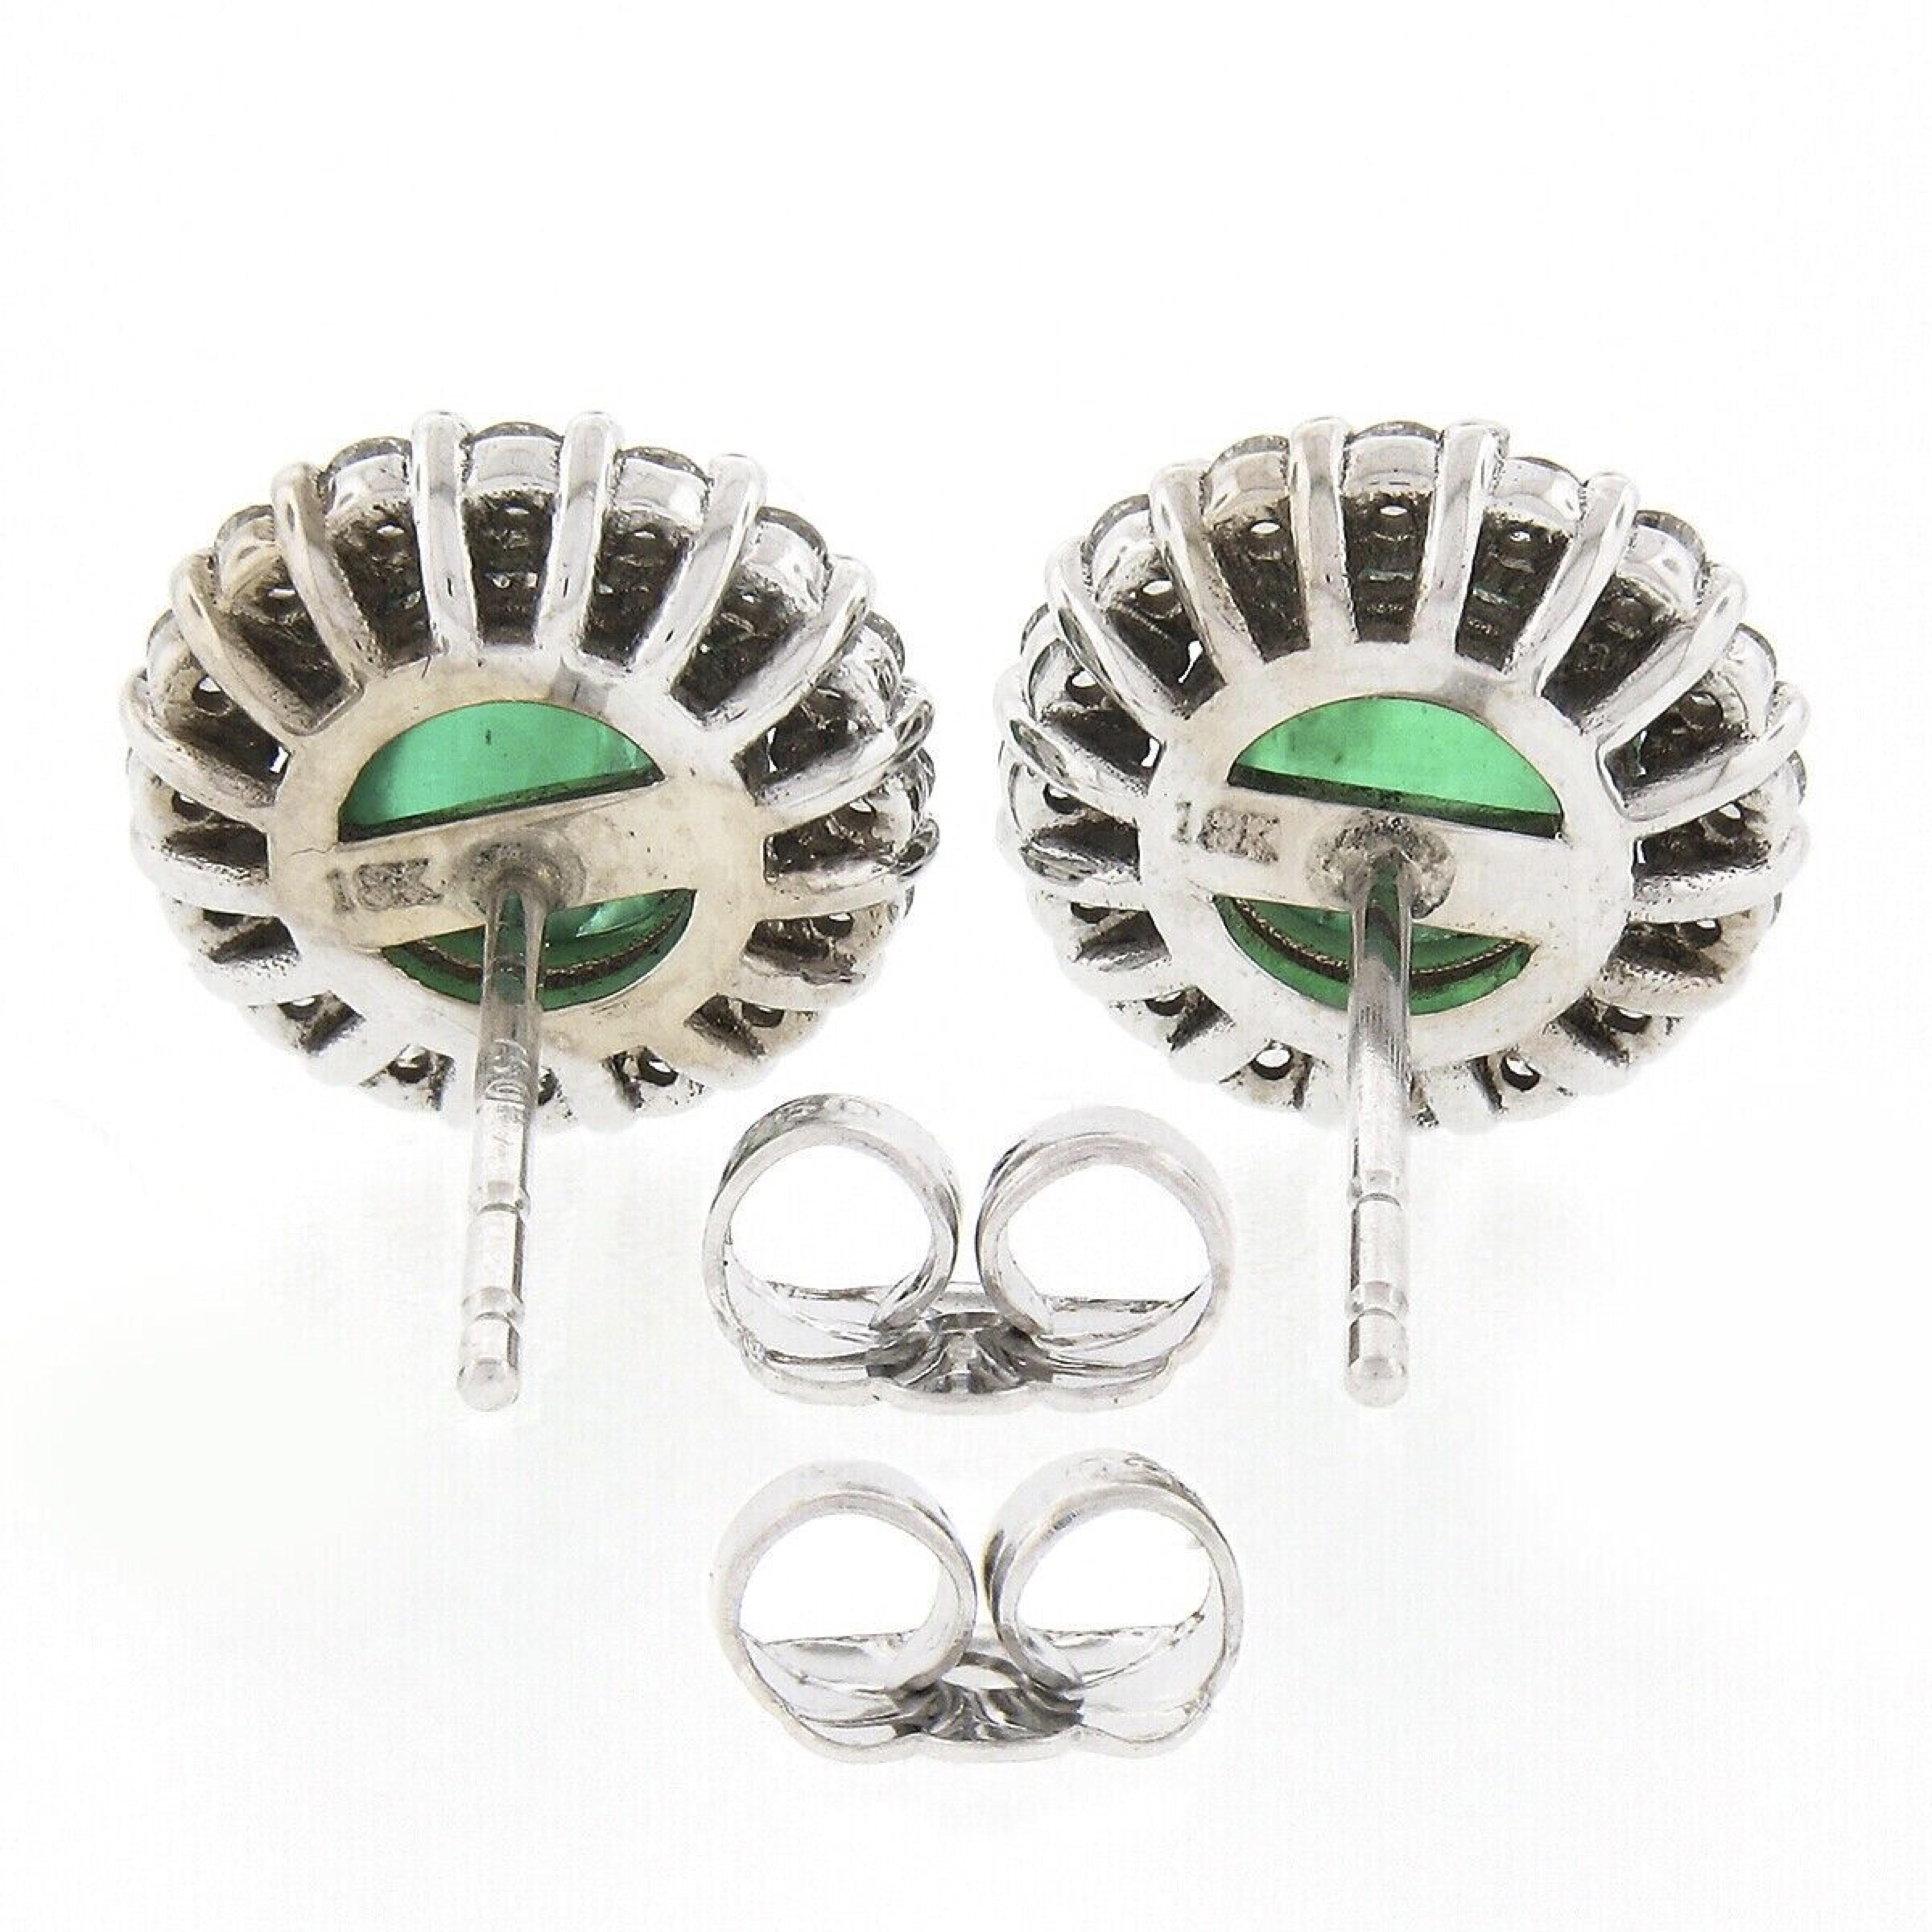 New 18k White Gold 1.72ctw Round Cabochon Emerald w/ Diamond Halo Stud Earrings In New Condition For Sale In Montclair, NJ